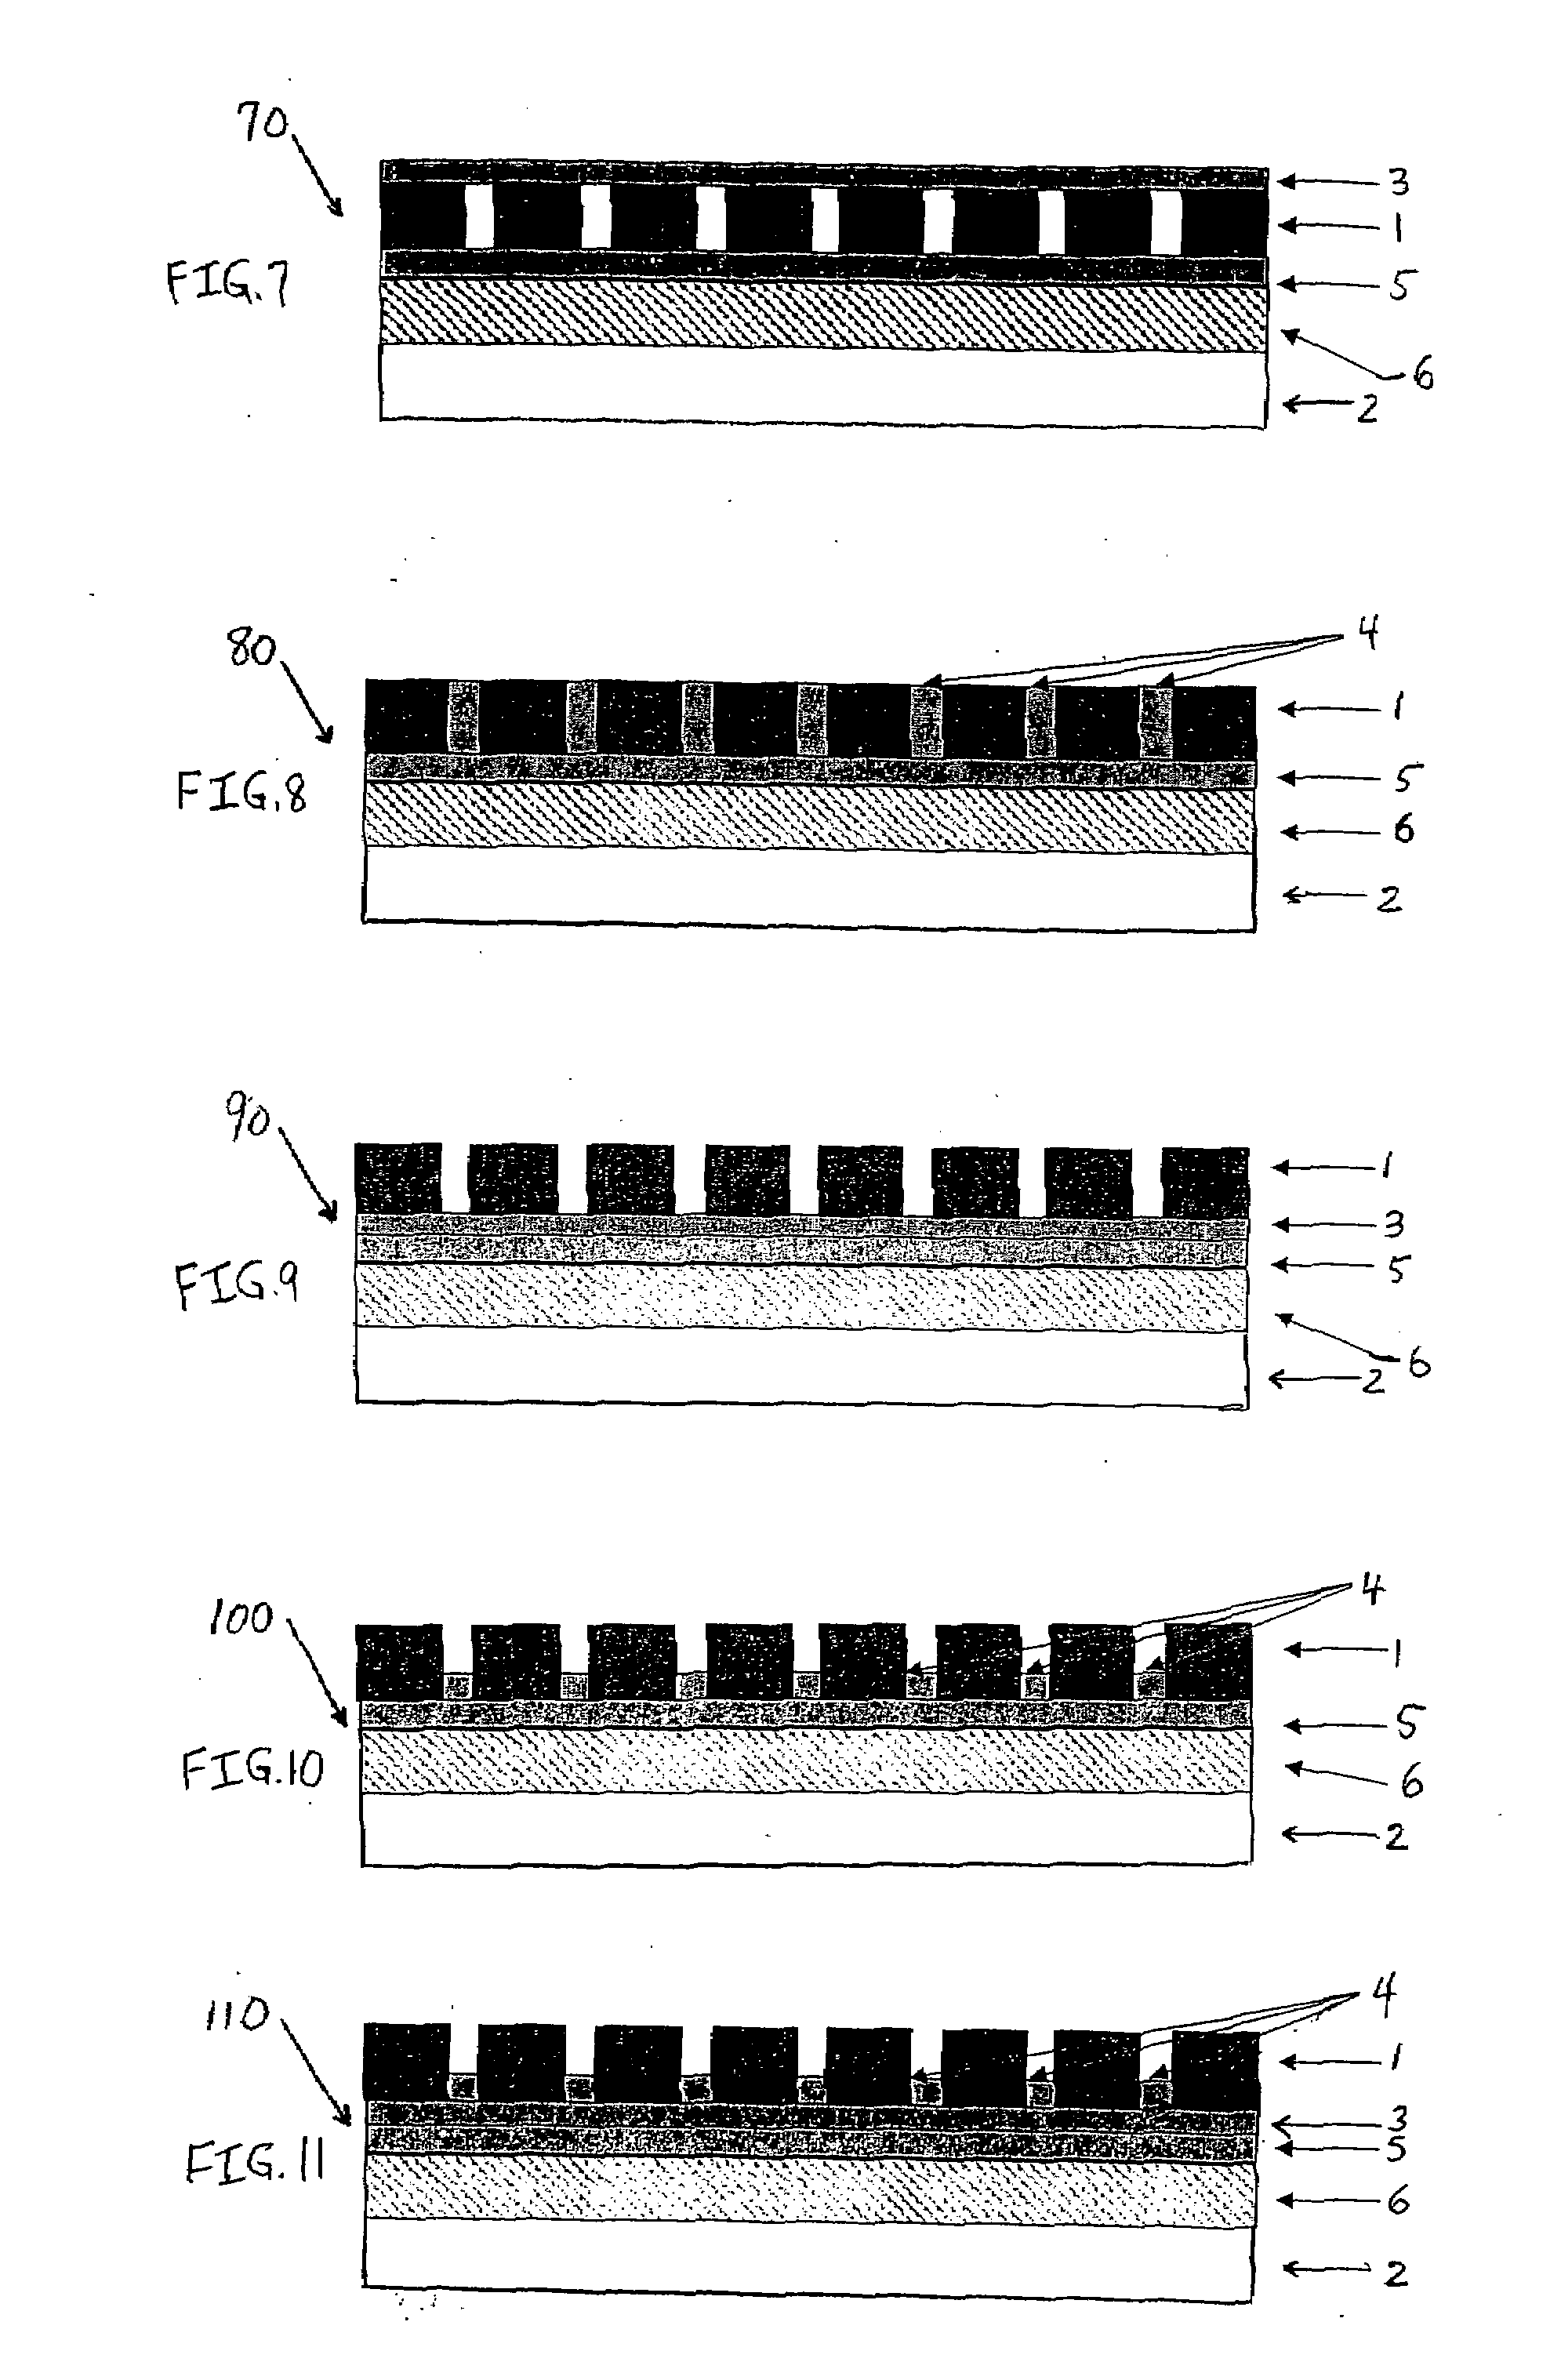 Bit patterned magnetic media with exchange coupling between bits